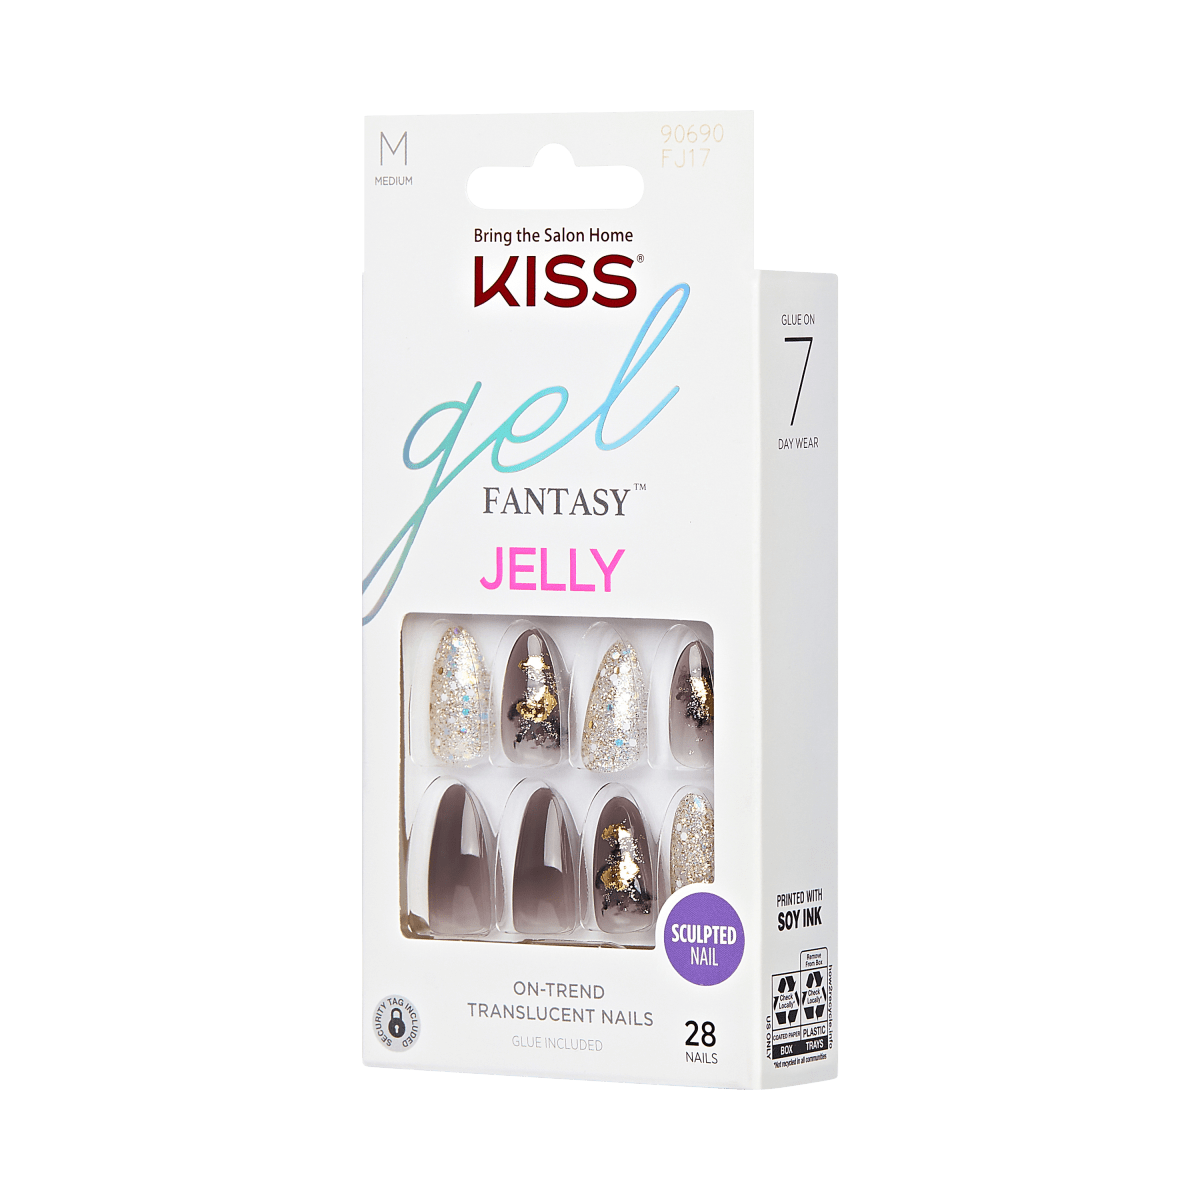 KISS Gel Fantasy Jelly Press-On Nails, Floral Jelly, Brown & Gold ...